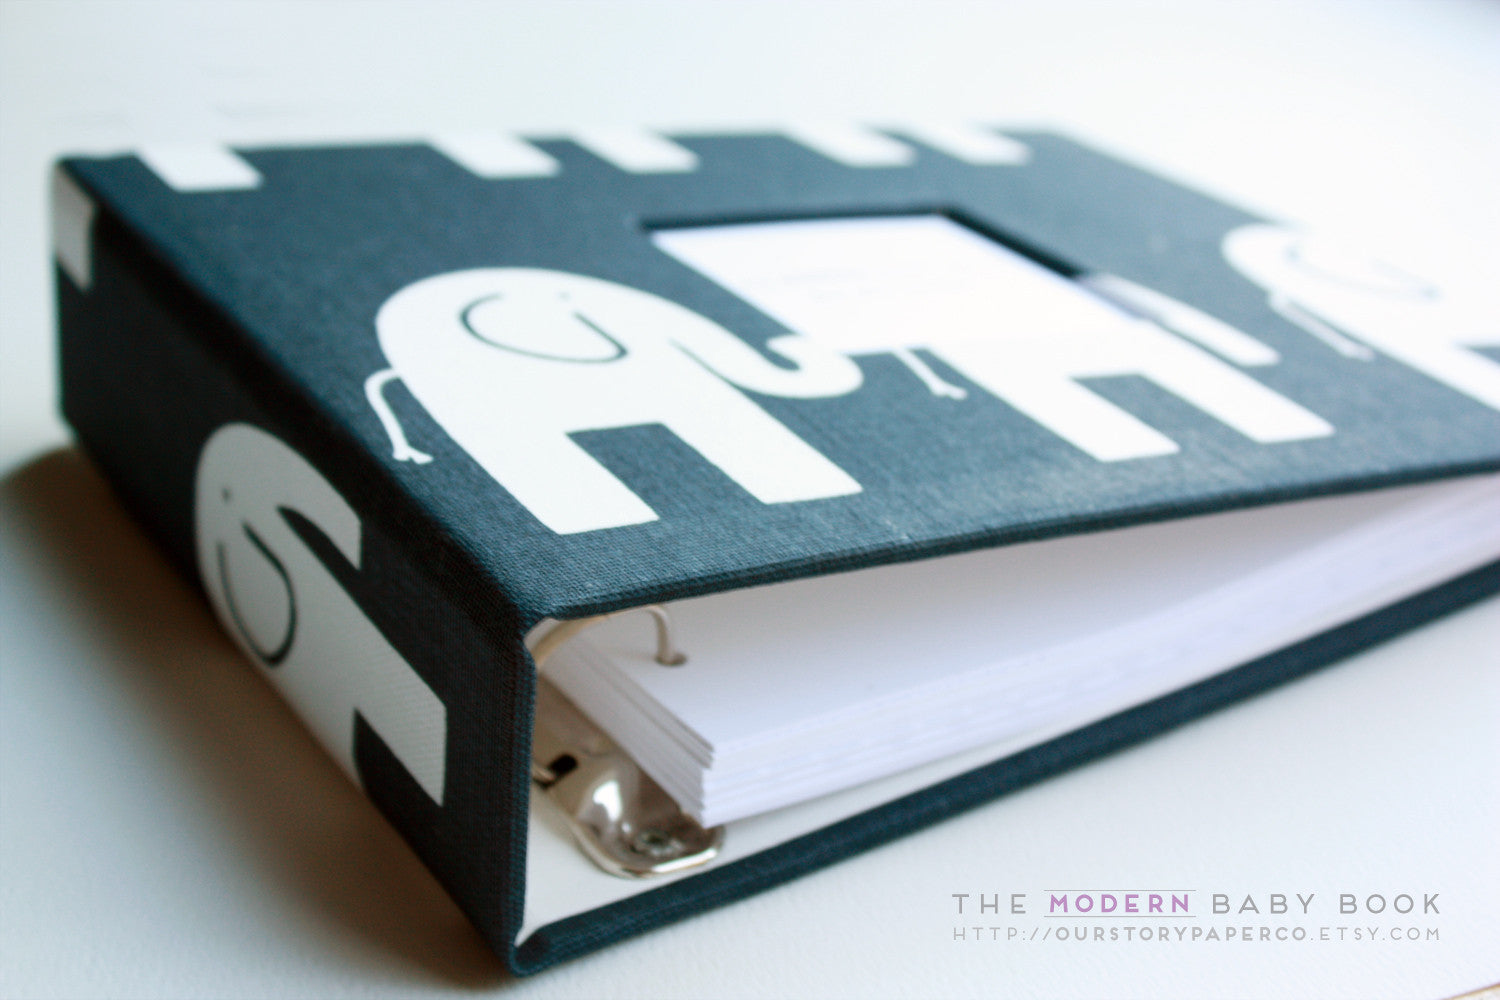 Navy Elephant Modern Baby Book - Our Story Paper Co.